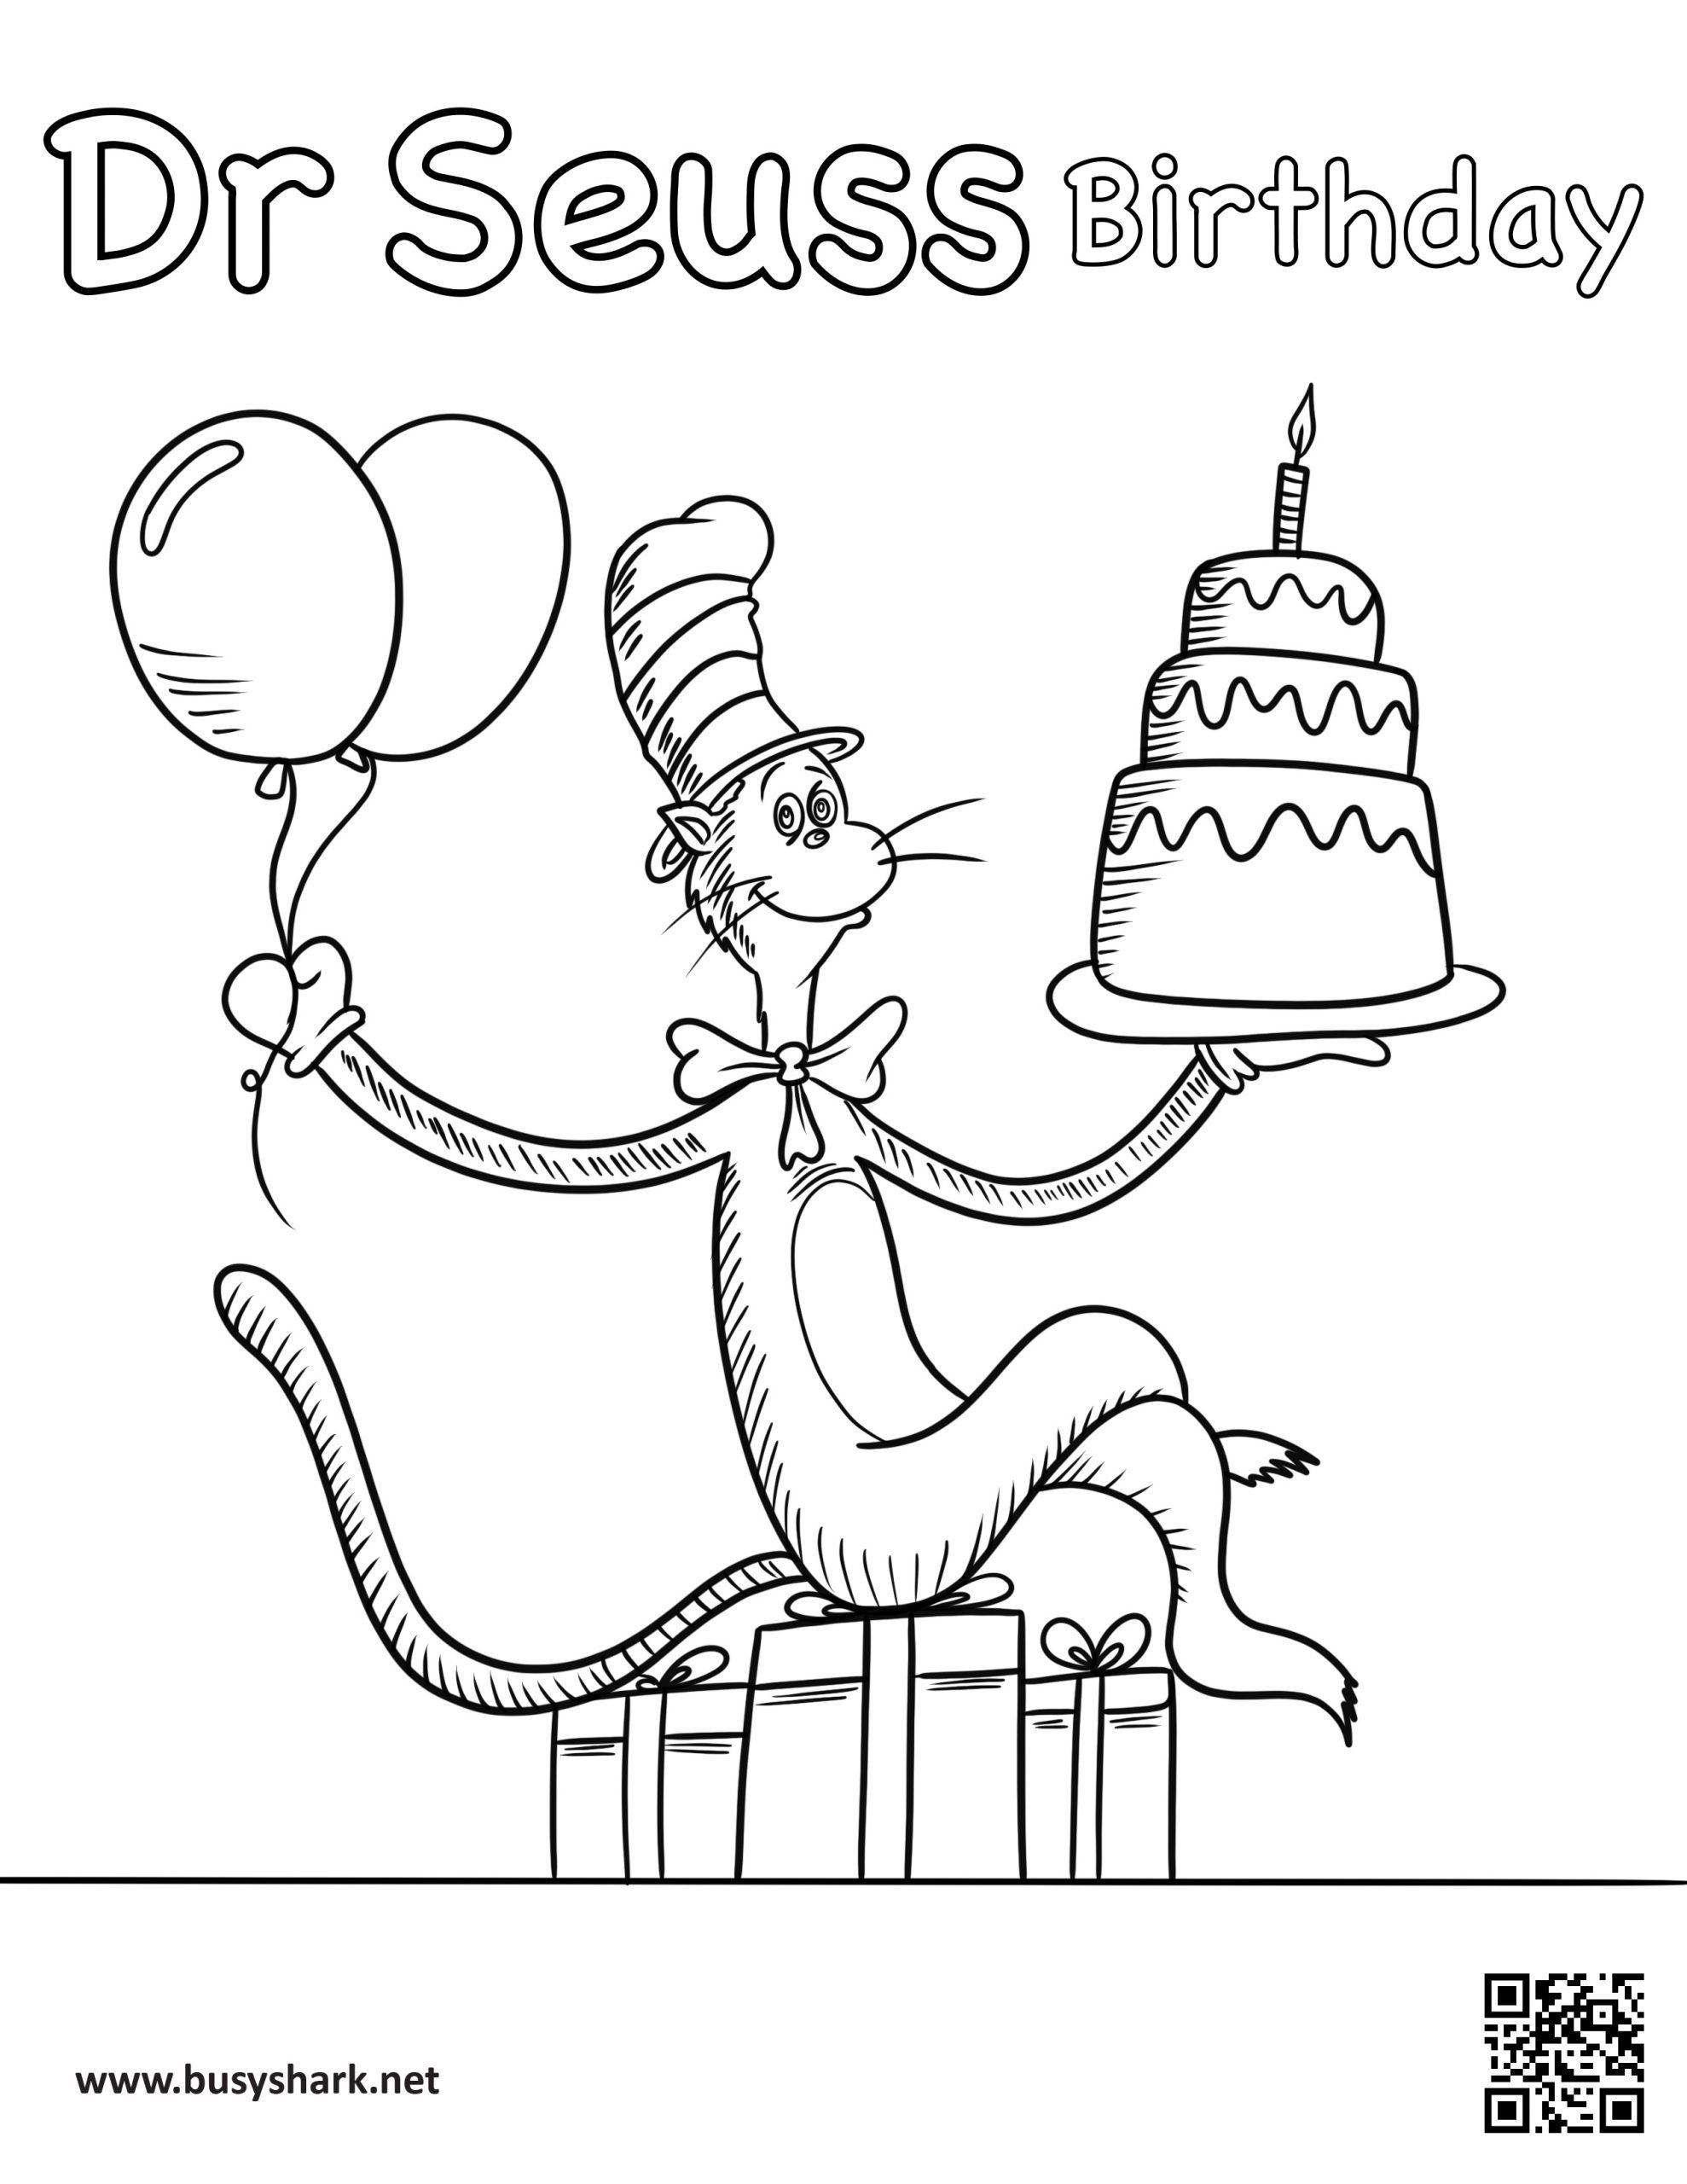 Happy birthday dr seuss coloring page free printable